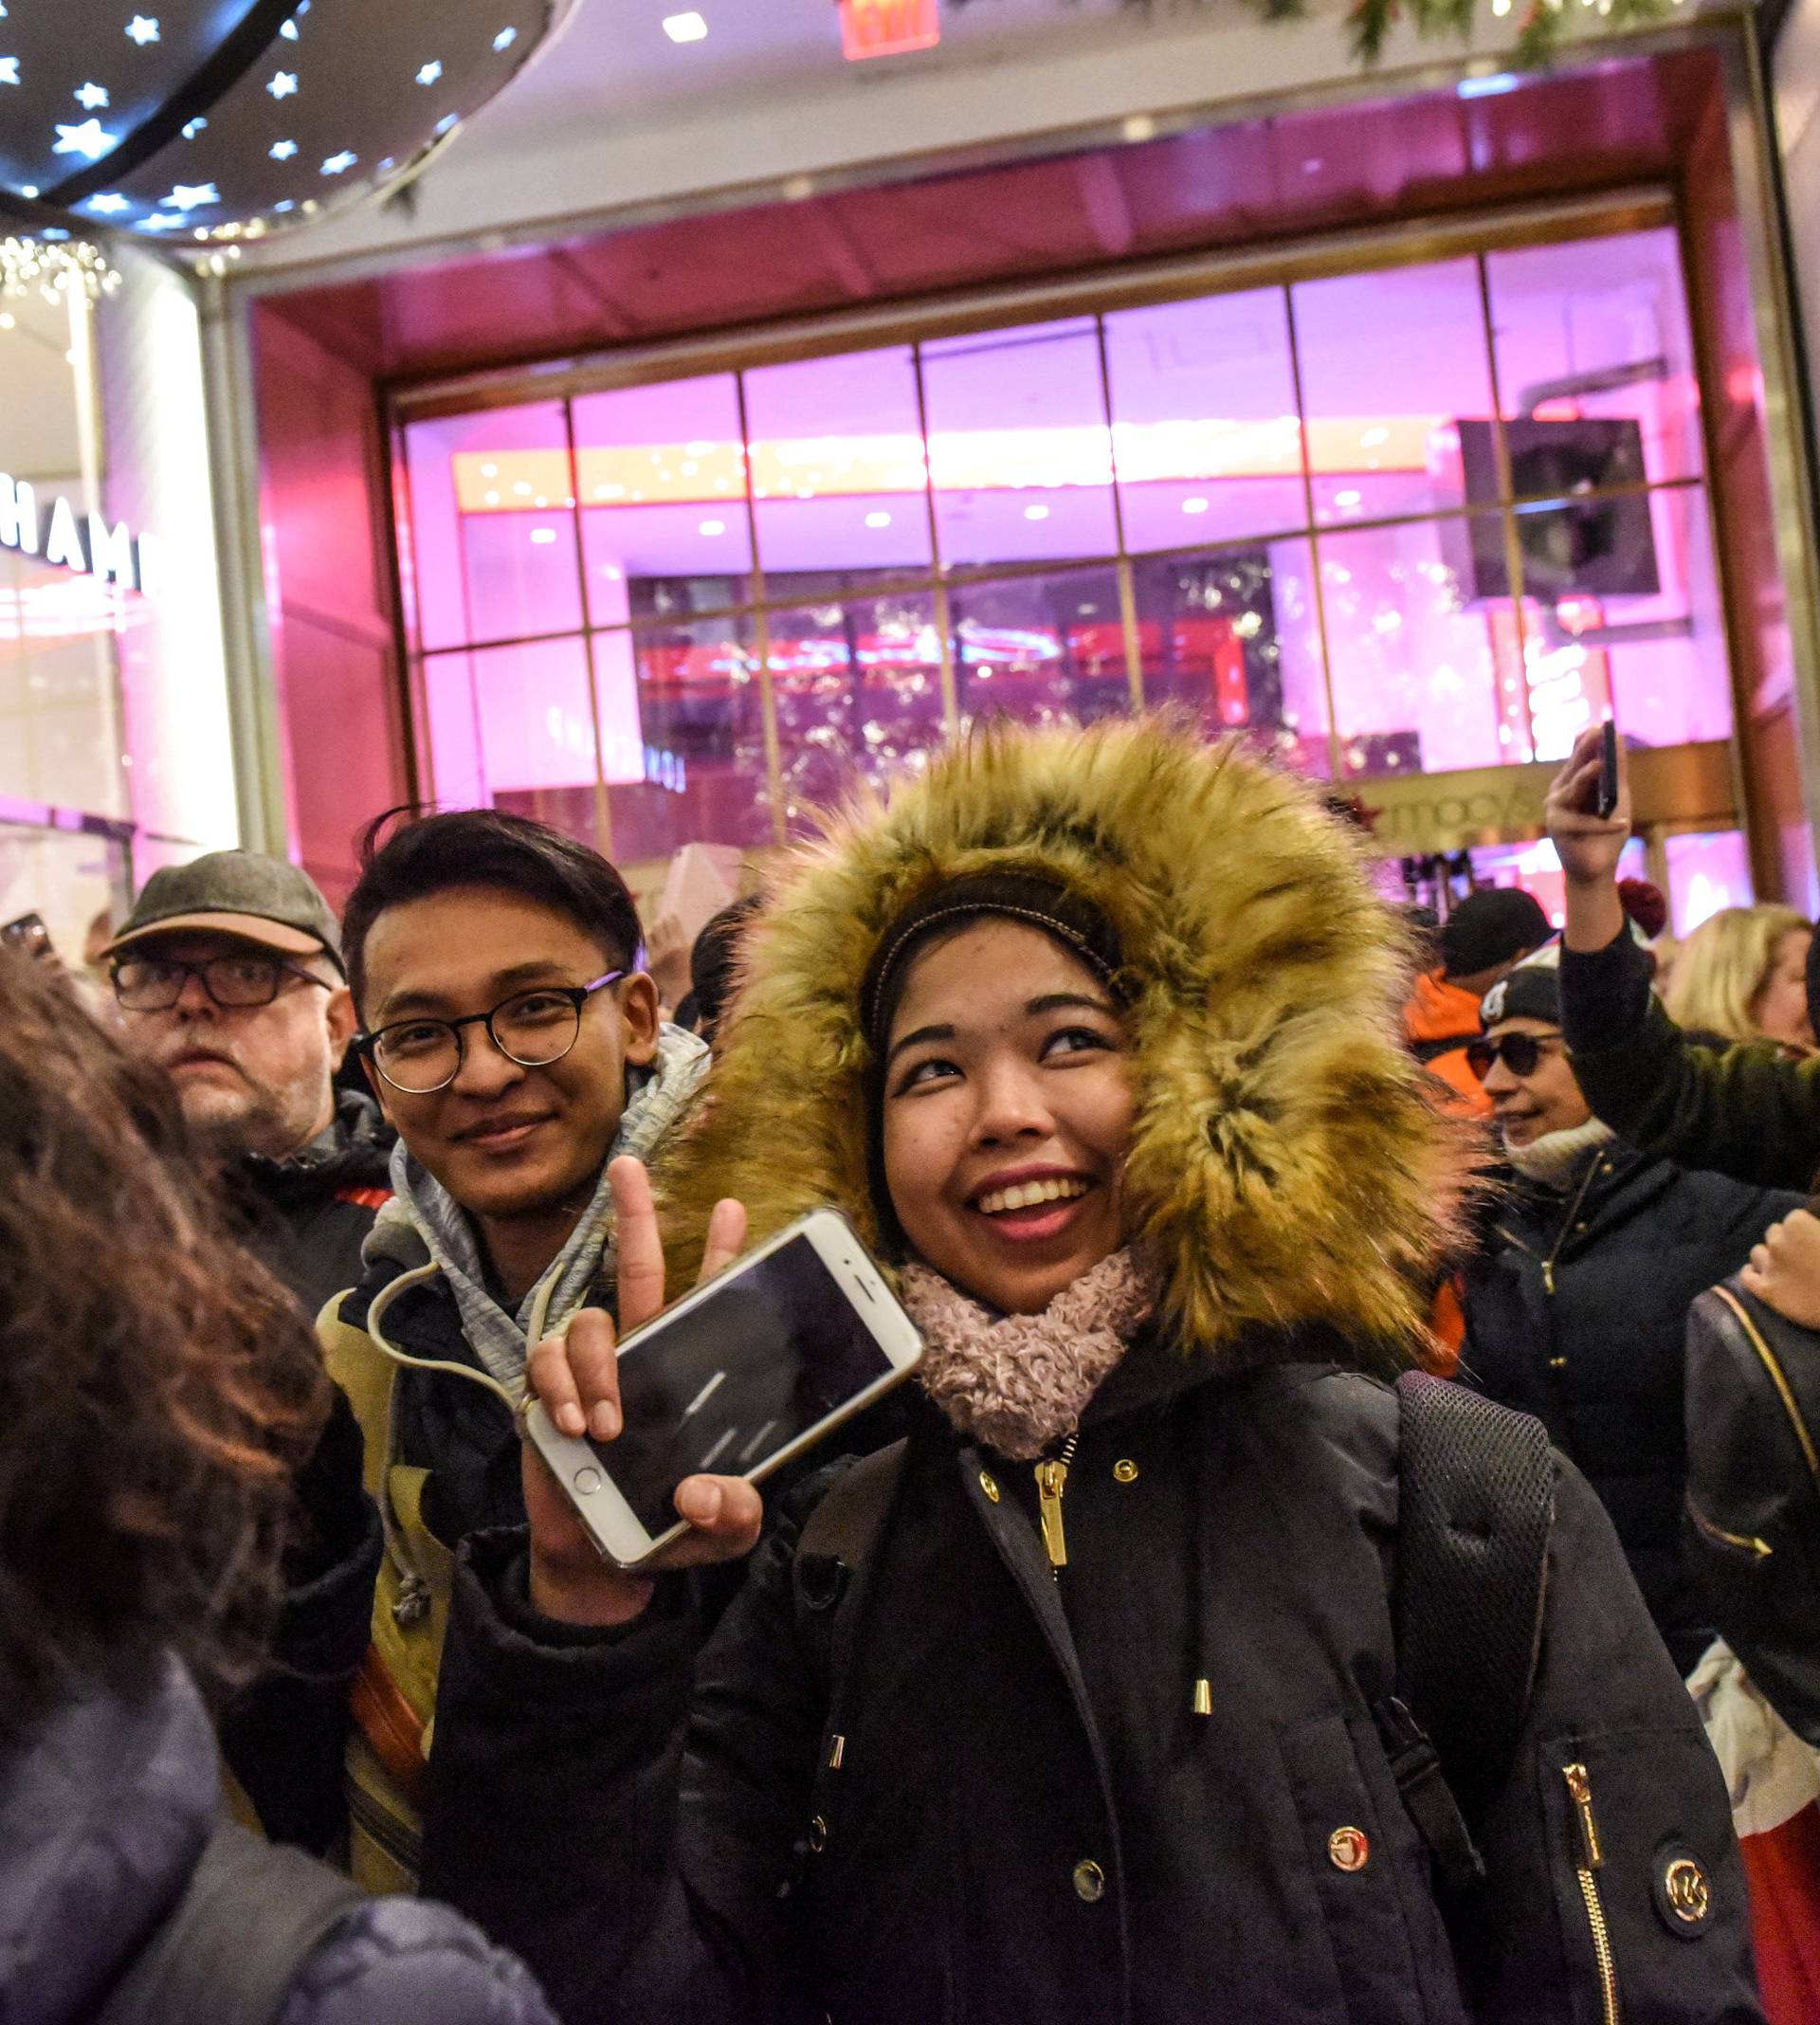 People rush in after the doors are opened during a Black Friday sales event at Macy's flagship store in New York